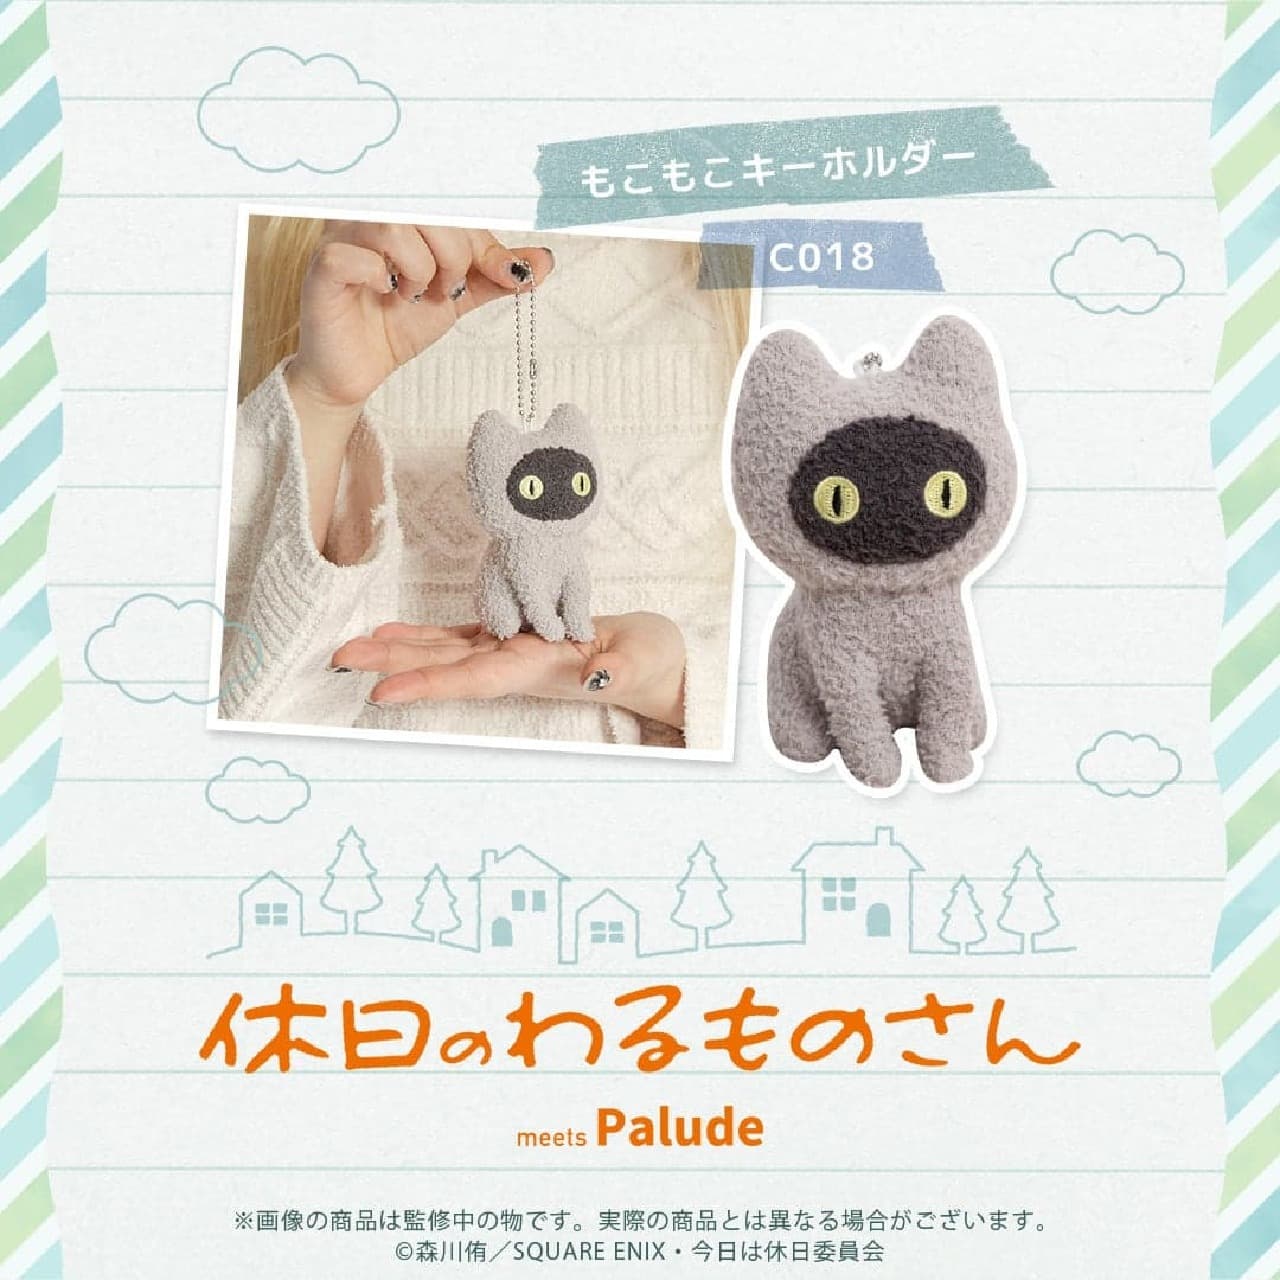 Village Vanguard and Palude collaborated to launch a wide variety of goods, including a fluffy key holder and amigurumi dolls based on the image of the TV animation "Holiday no Warumono-san" from the end of August to mid-September.